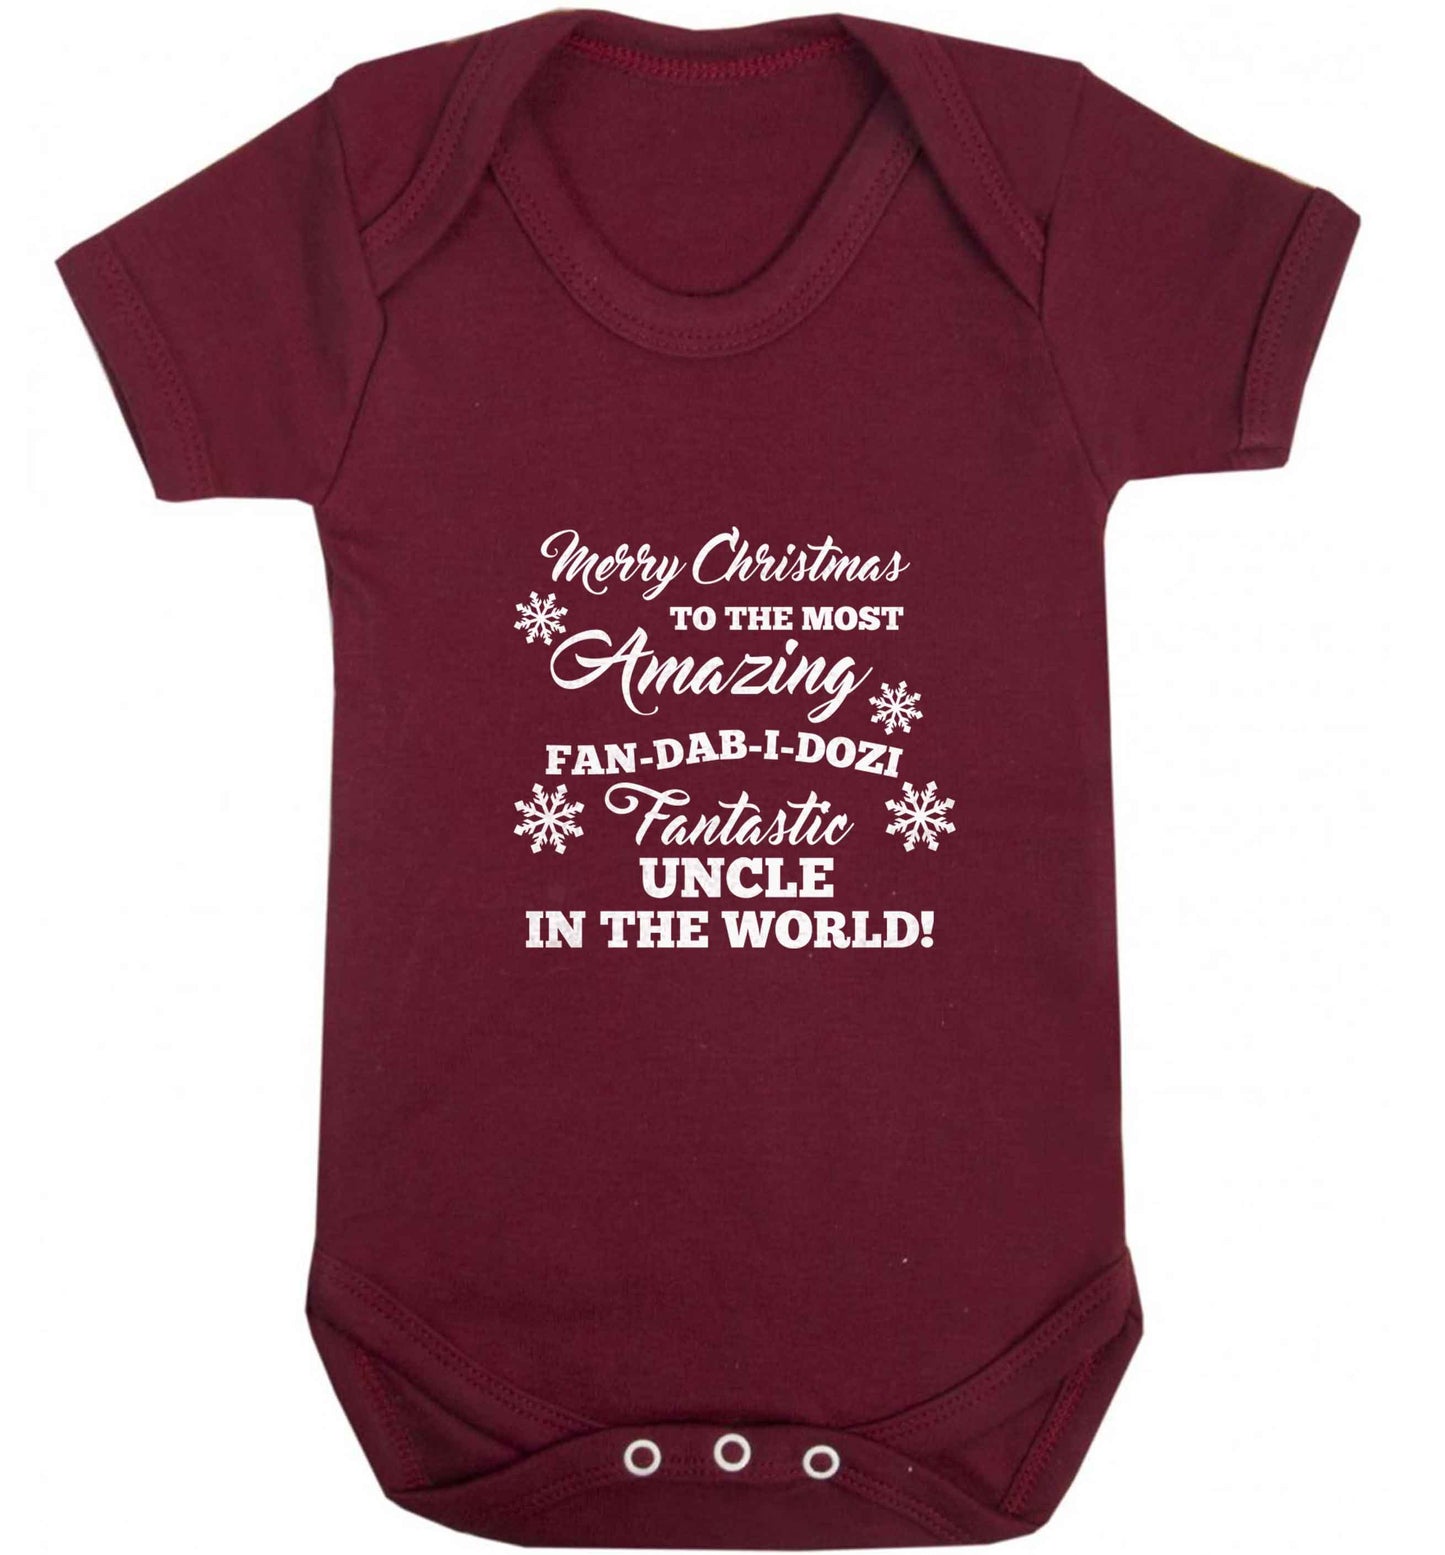 Merry Christmas to the most amazing fan-dab-i-dozi fantasic Uncle in the world baby vest maroon 18-24 months